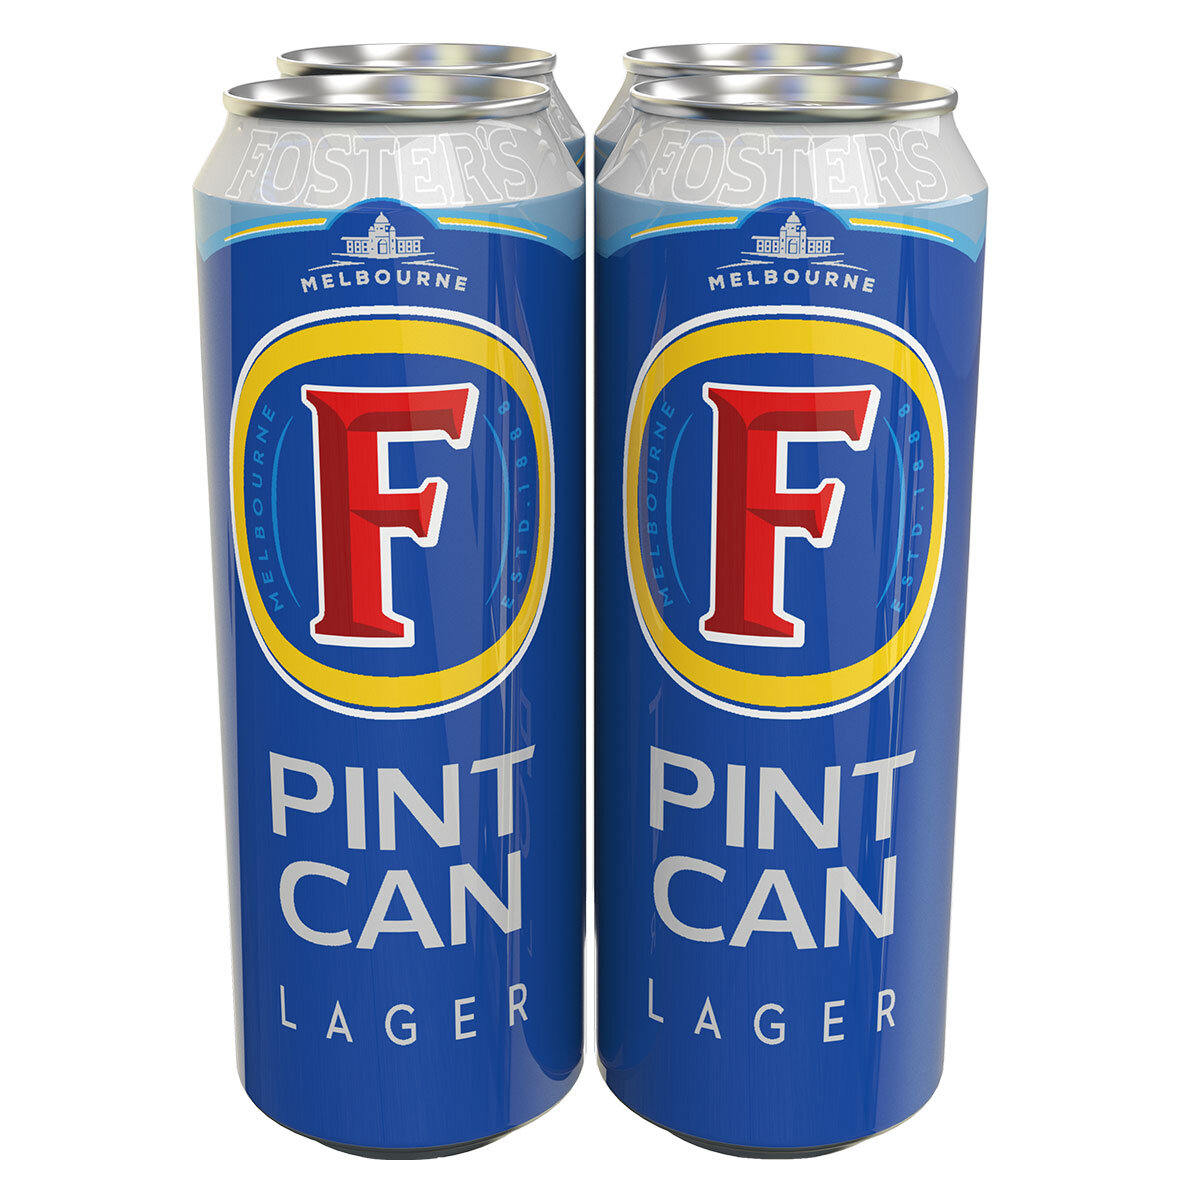 Fosters 4 x 568ml Cans